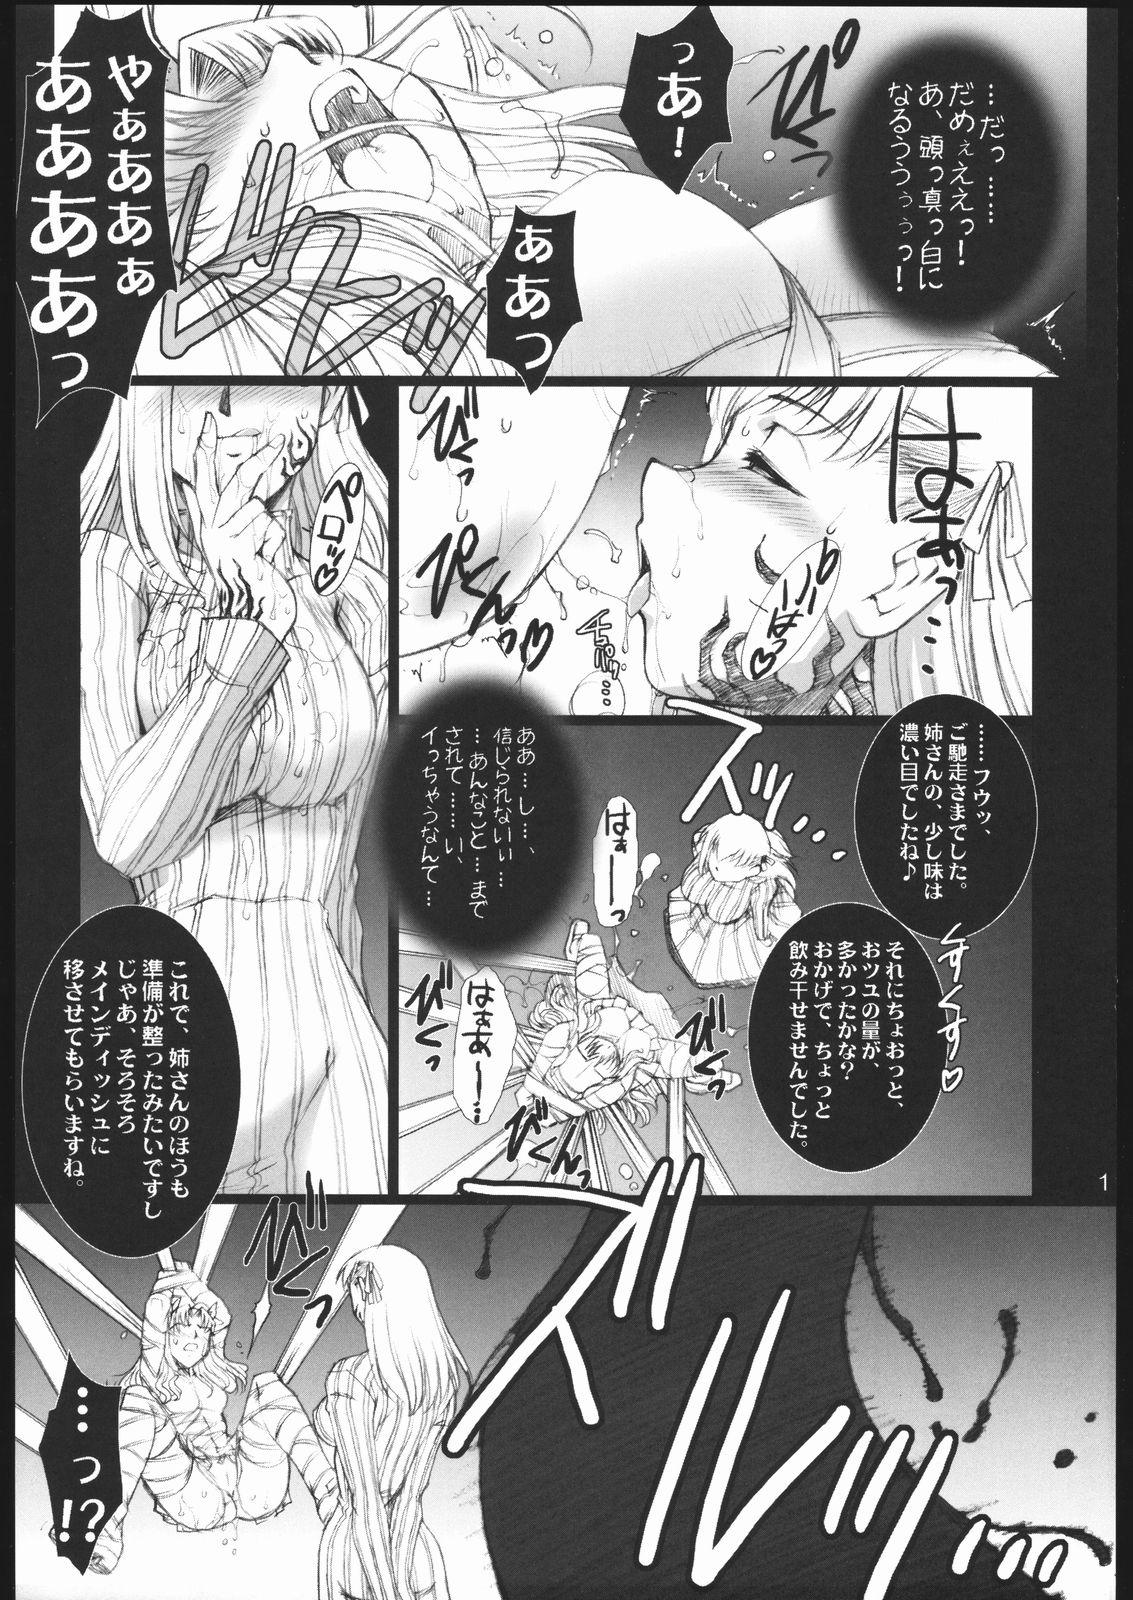 Fishnet Red Degeneration - Fate stay night Sextoy - Page 10